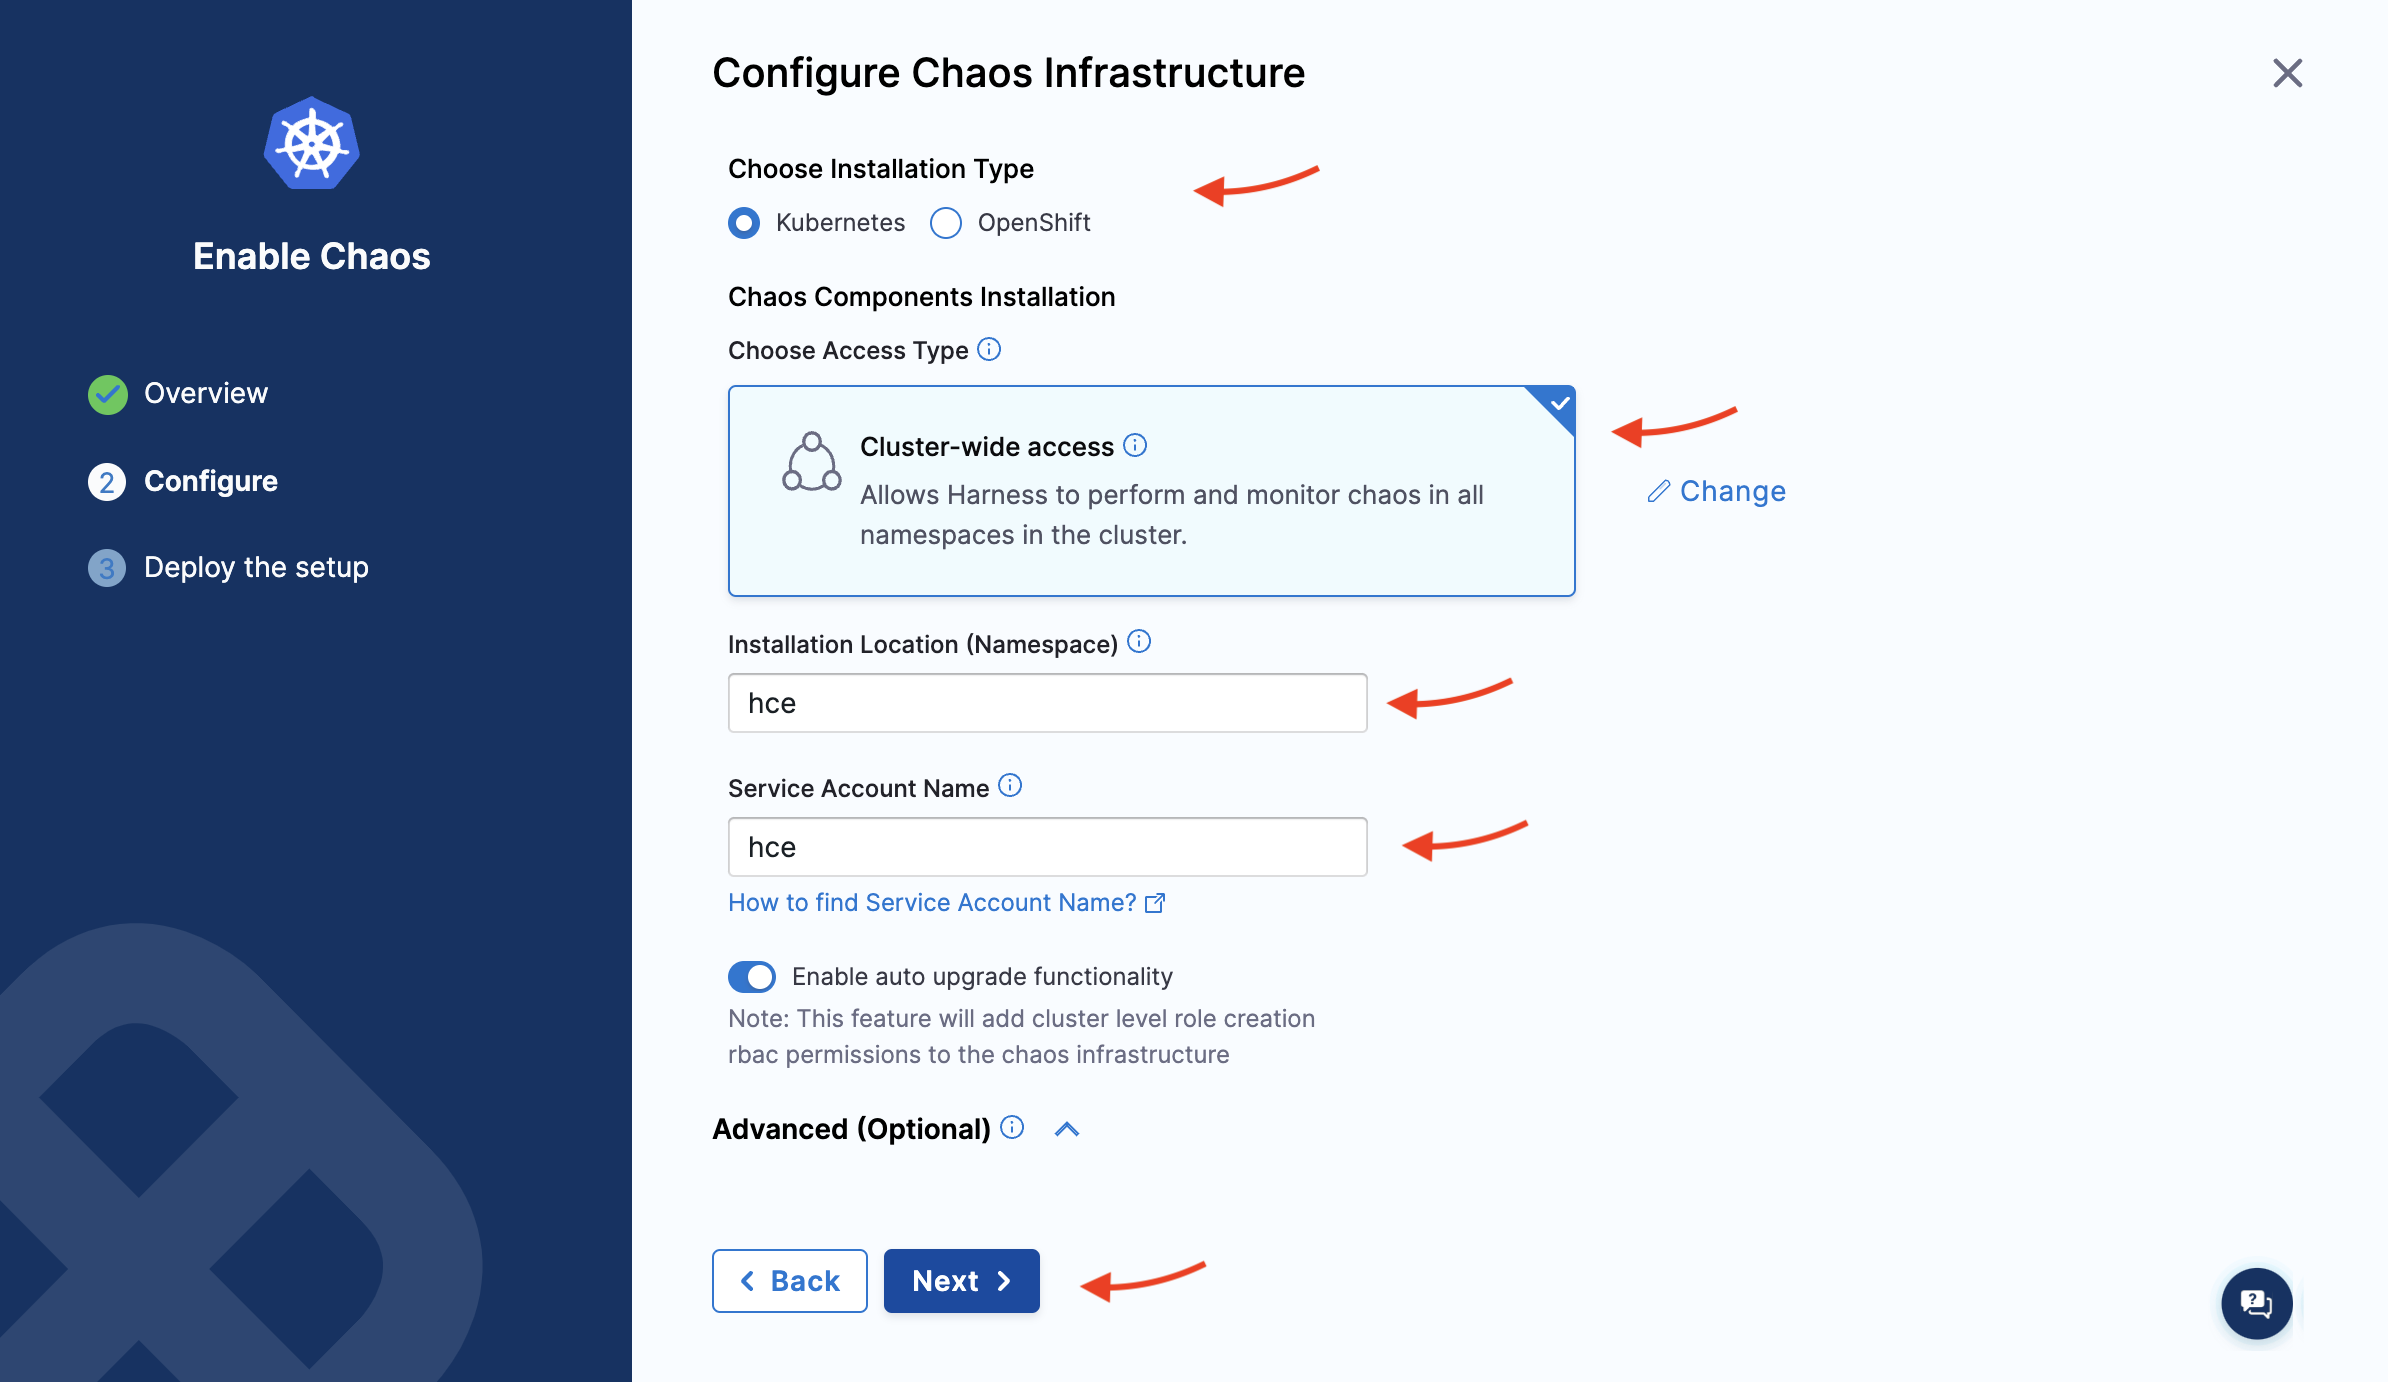 Configure Chaos Infrastructure